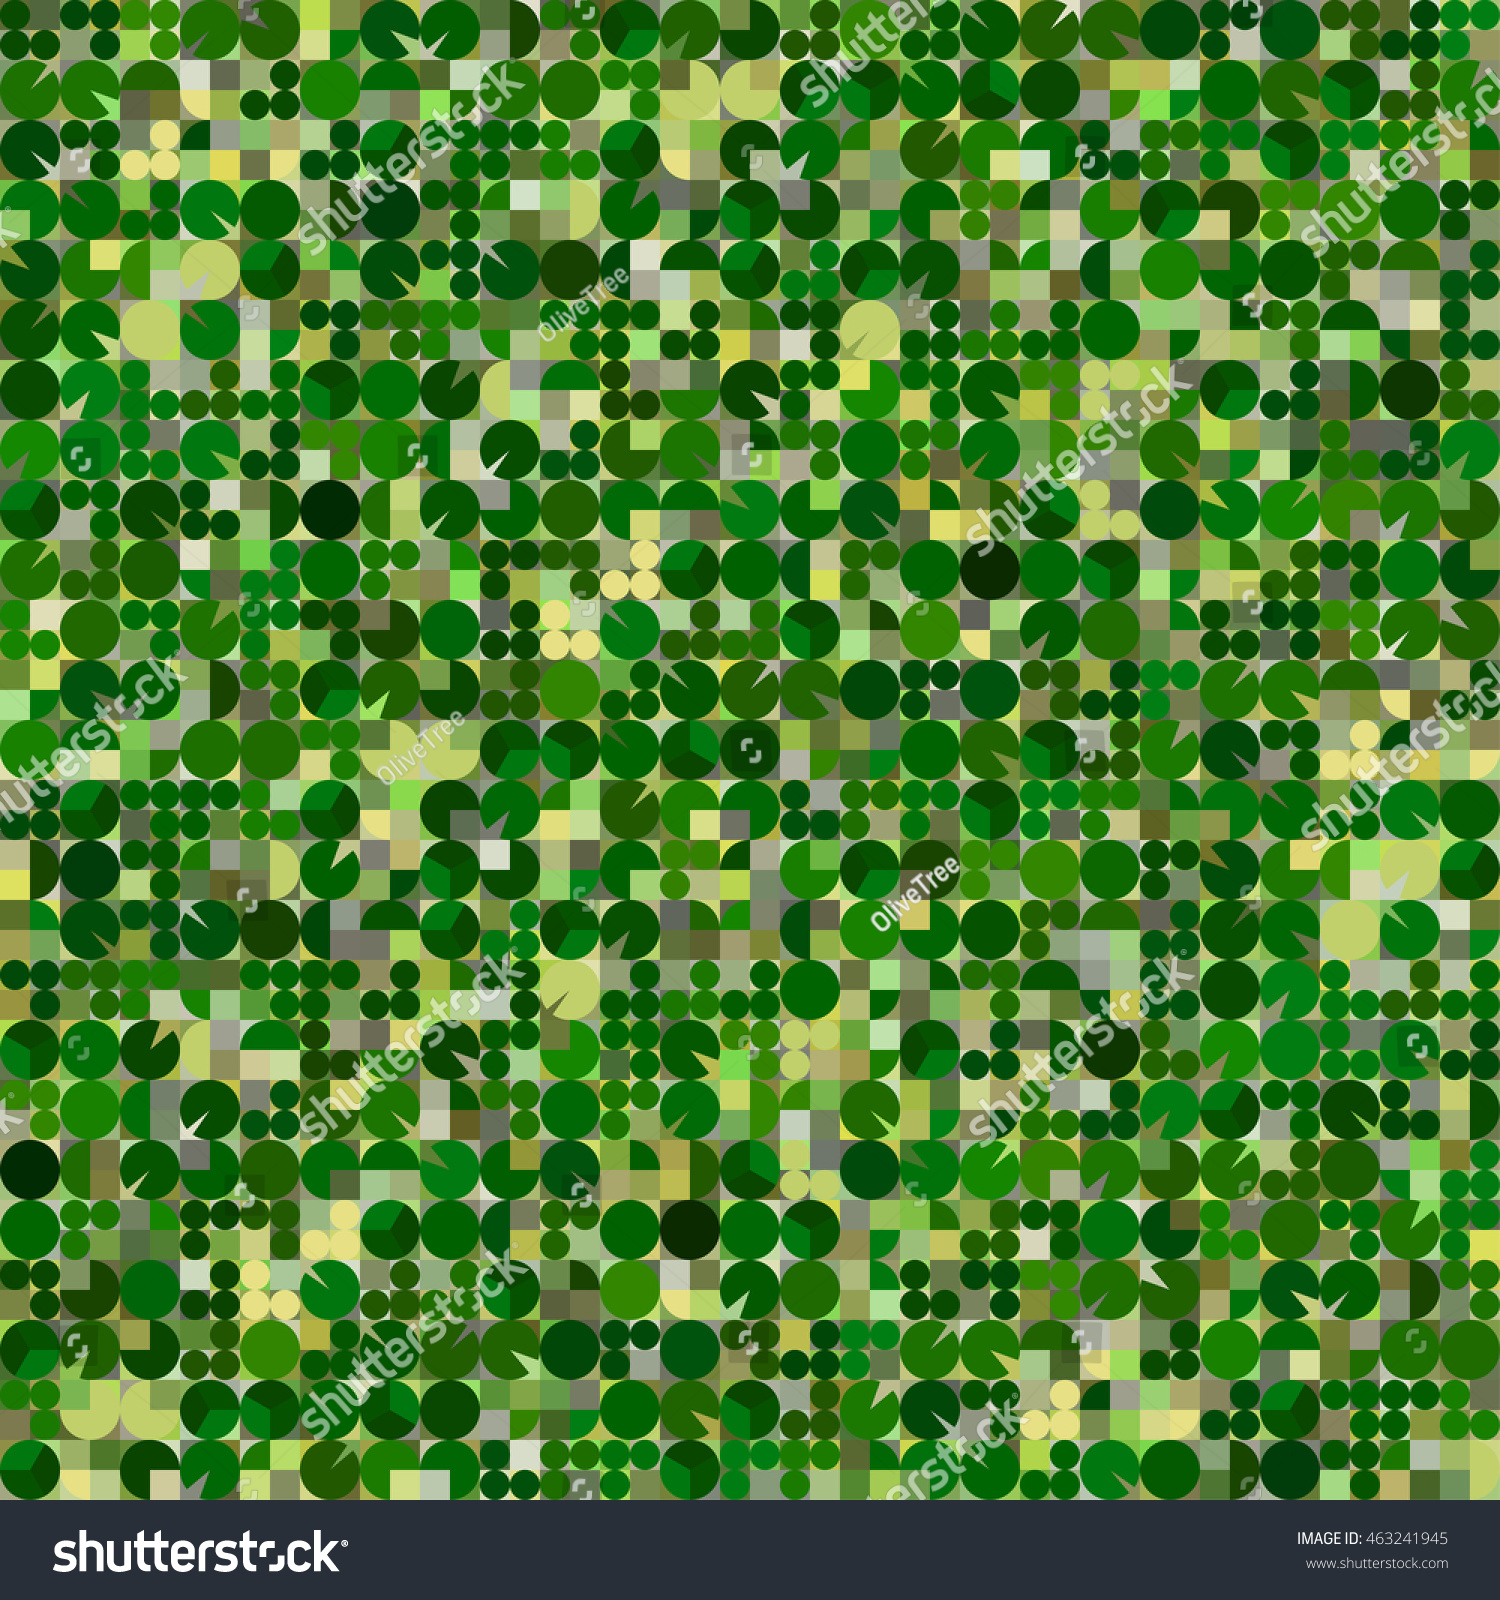 SVG of Center-pivot irrigation circular fields. Agricultural seamless pattern. Generative vector texture looking like aerial or satellite imagery svg